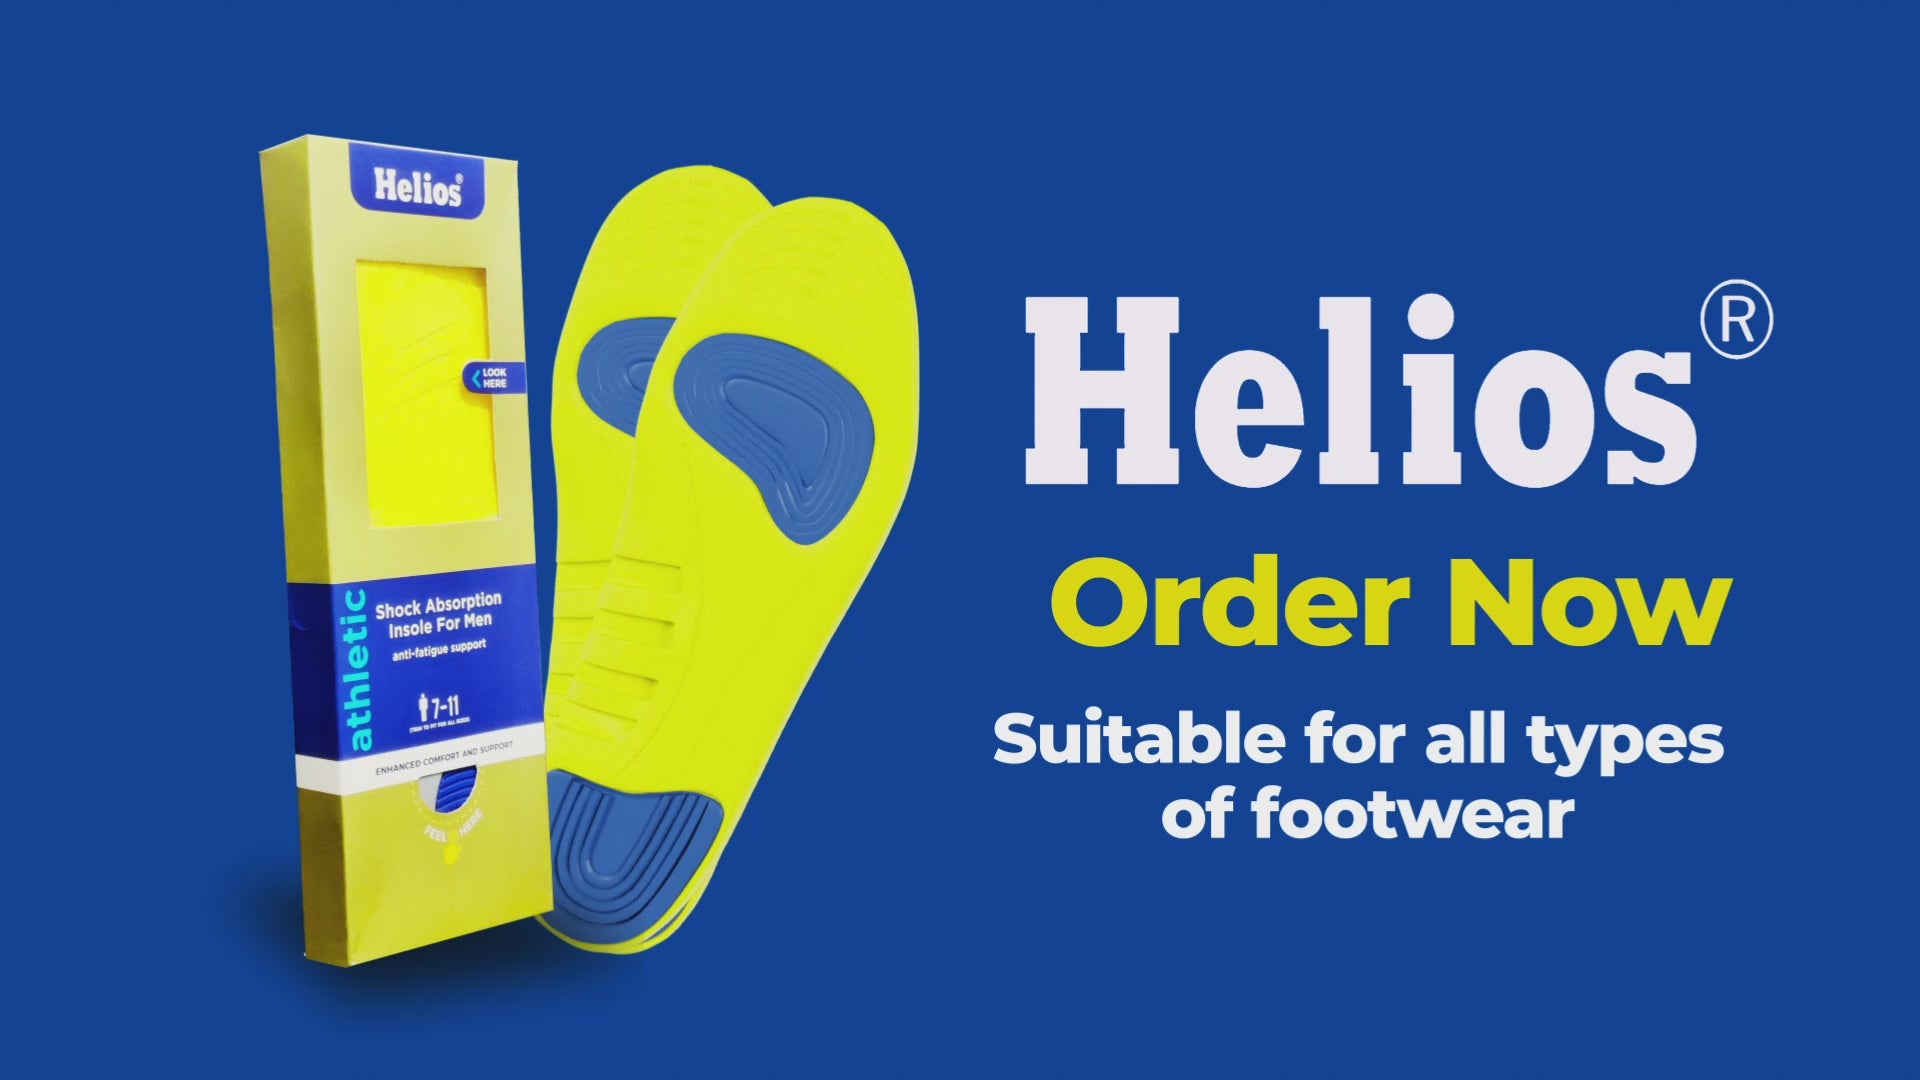 HELIOS TRIPLE LAYER ULTRA COMFORT INSOLES FOR PAIN RELIEF AND SHOCK ABSORPTION